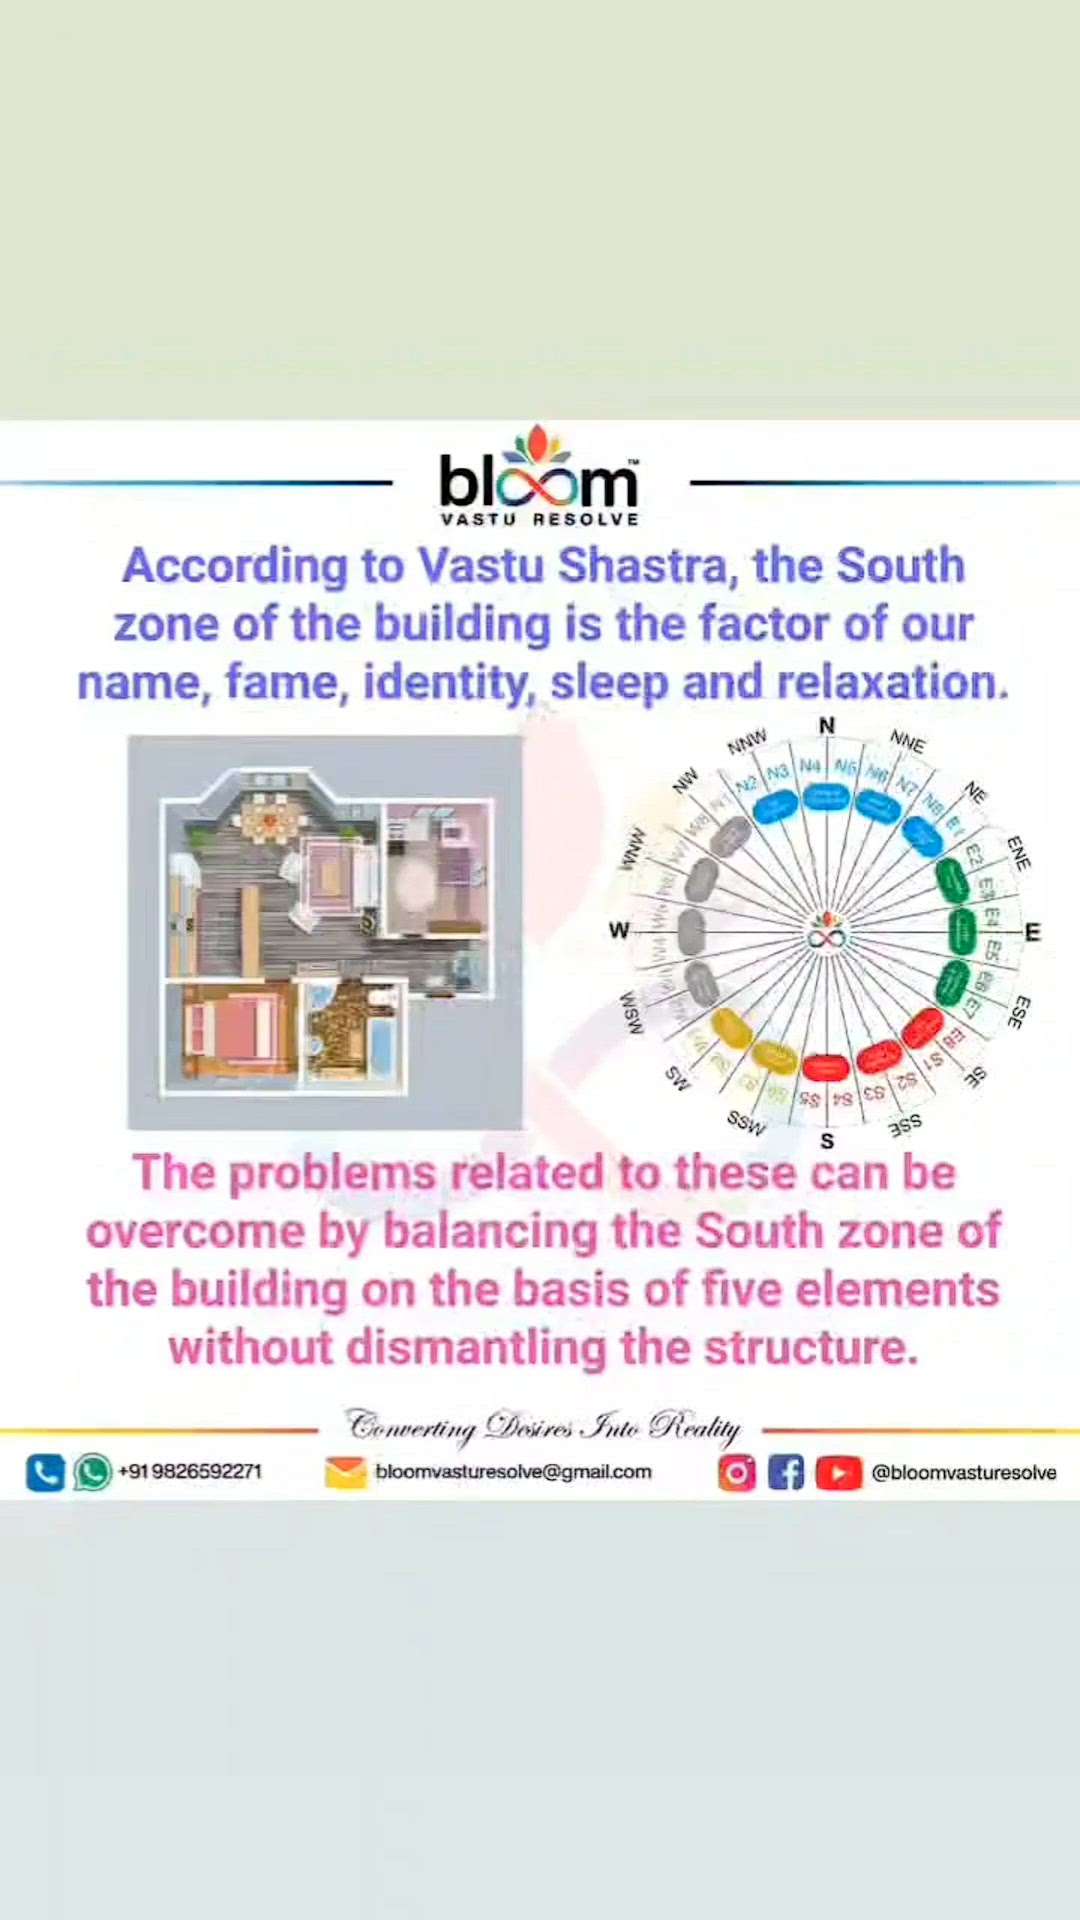 Your queries and comments are always welcome.
For more Vastu please follow @bloomvasturesolve
on YouTube, Instagram & Facebook
.
.
For personal consultation, feel free to contact certified MahaVastu Expert through
M - 9826592271
Or
bloomvasturesolve@gmail.com
#vastu #वास्तु #mahavastu #mahavastuexpert #bloomvasturesolve  #vastureels #vastulogy #vastuexpert  #vasturemedies  #vastuforhome #vastuforpeace #vastudosh #numerology #vastuforhealth #soithzone  #दक्षिणदिशा #bedroom